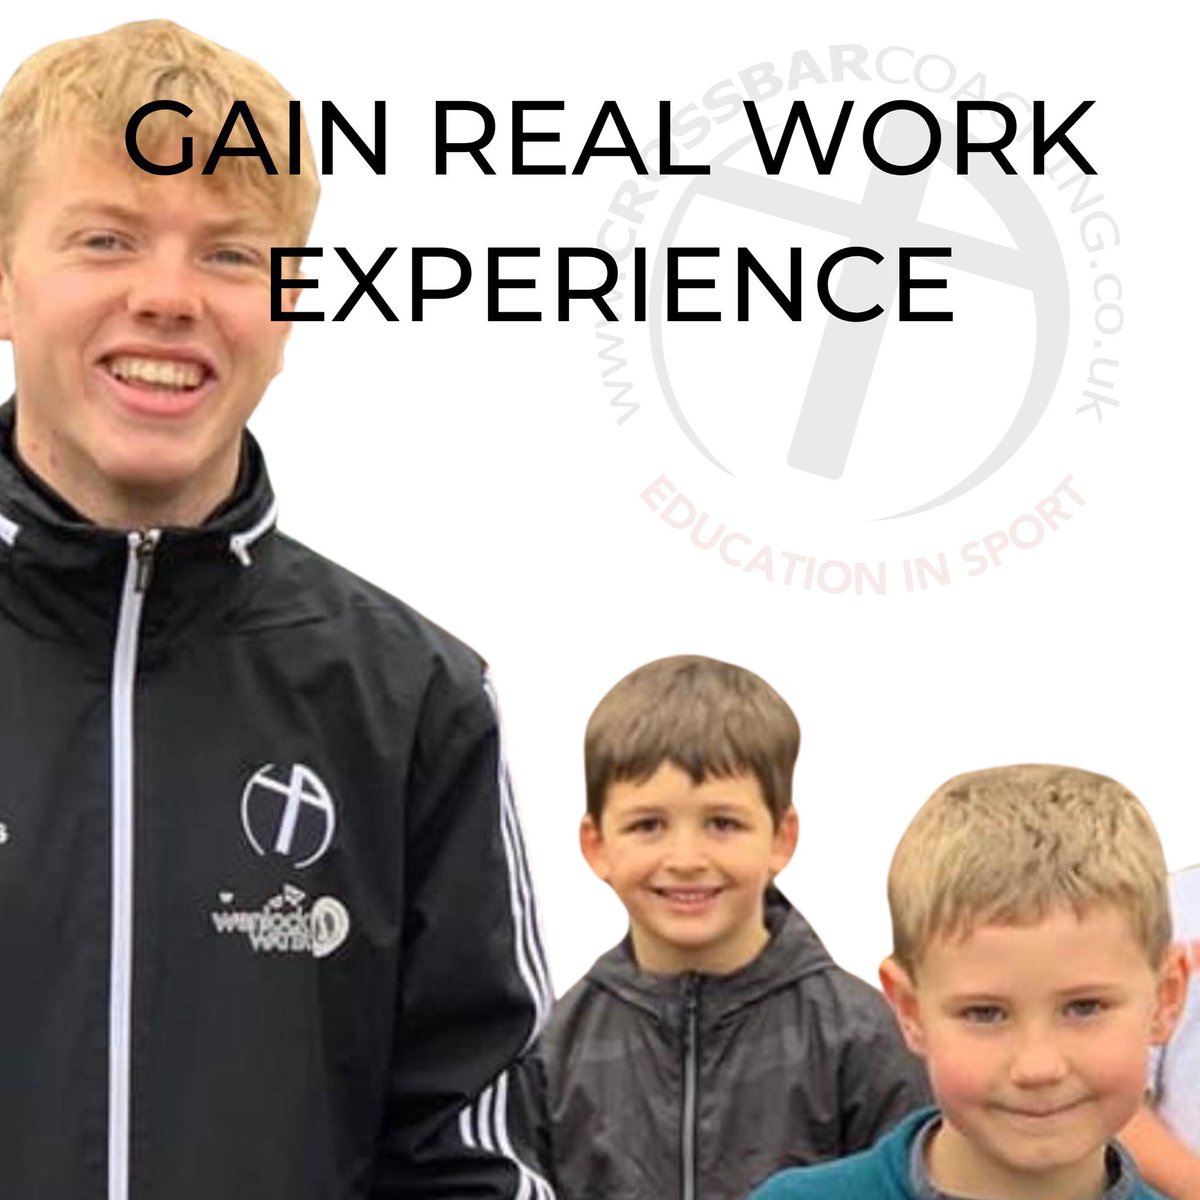 National Apprenticeship Week 2022

For more information on Apprenticeships AND short/long term courses for 16-24 year olds, contact us NOW!

Admin@crossbareducationandtraining.com

Also....

We are #MoreThanSport with courses in many other areas of #Employment